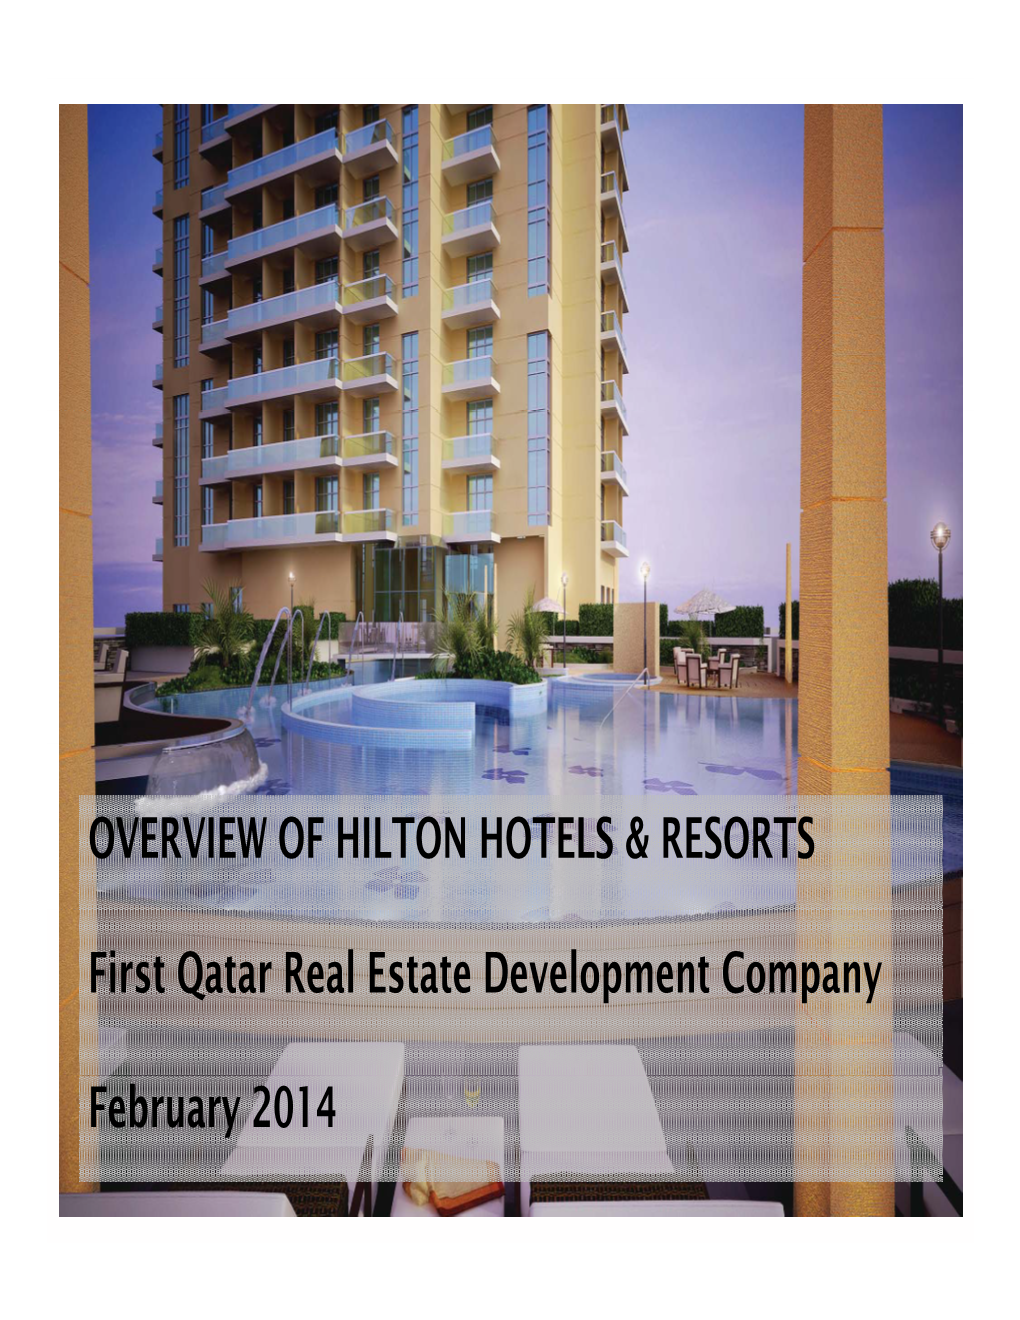 OVERVIEW of HILTON HOTELS & RESORTS First Qatar Real Estate Development Company February 2014